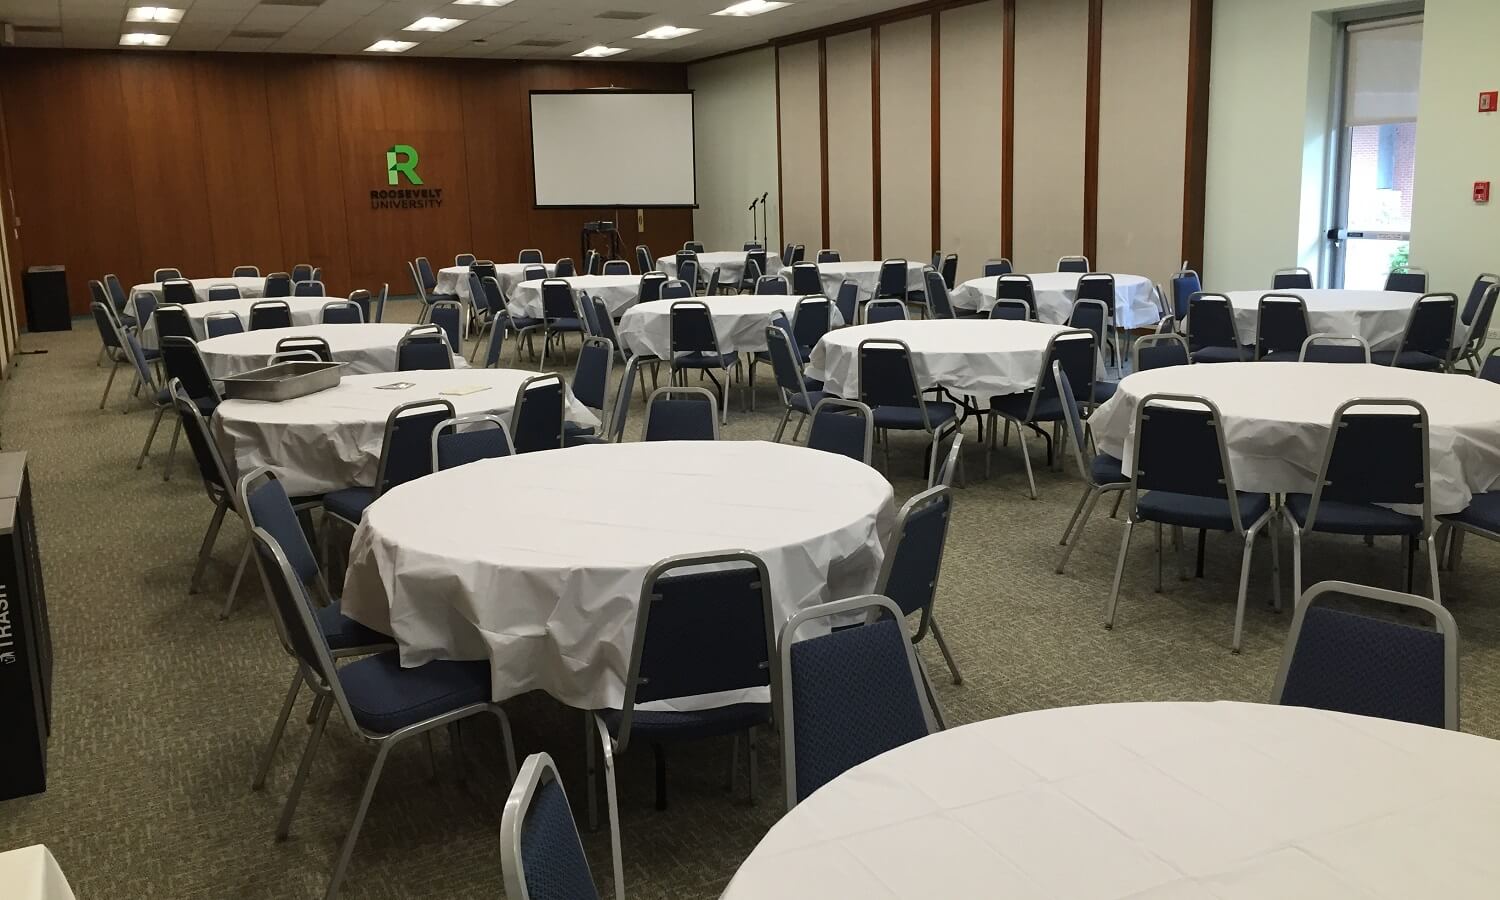 Large room with wood panelled walls featuring numerous round tables and chairs.